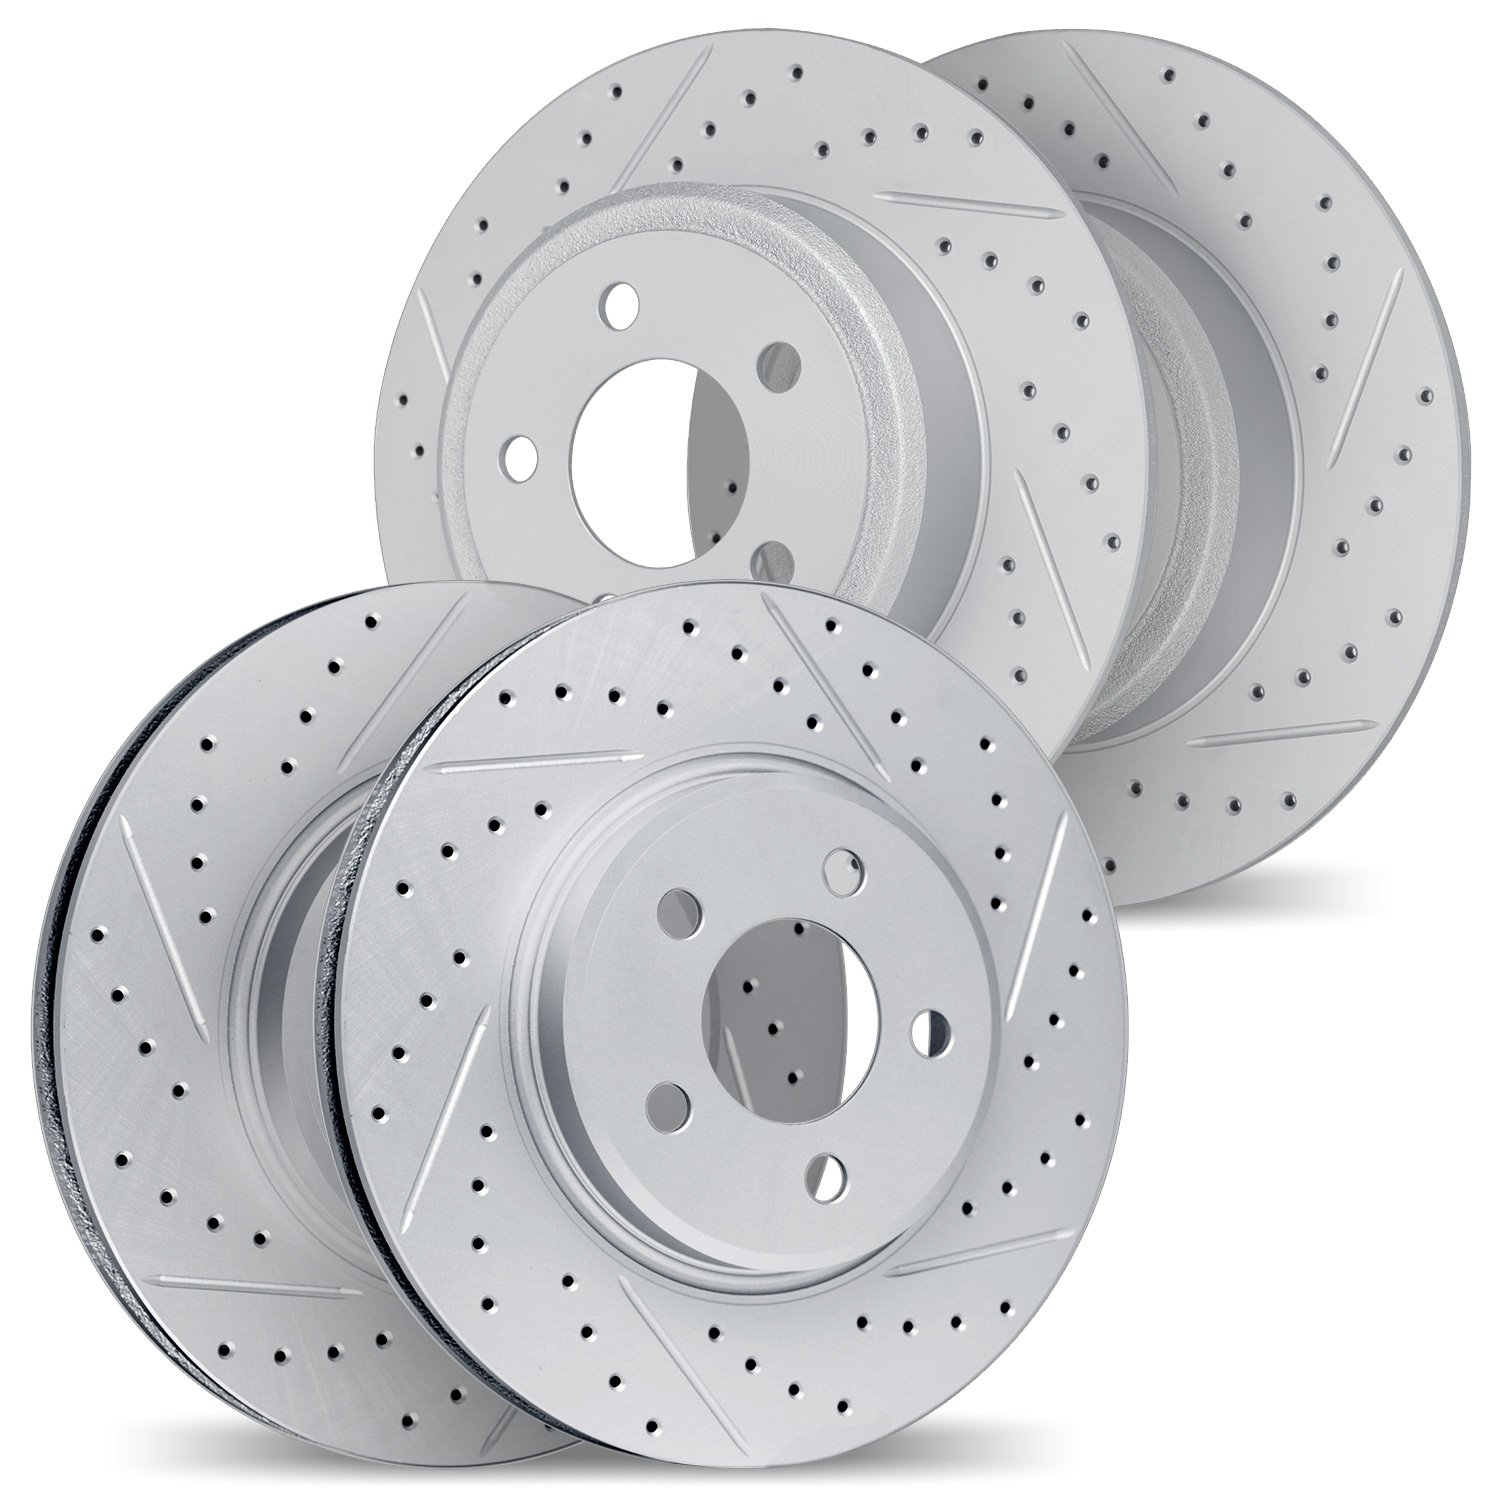 2004-76022 Geoperformance Drilled/Slotted Brake Rotors, 2009-2013 Multiple Makes/Models, Position: Front and Rear